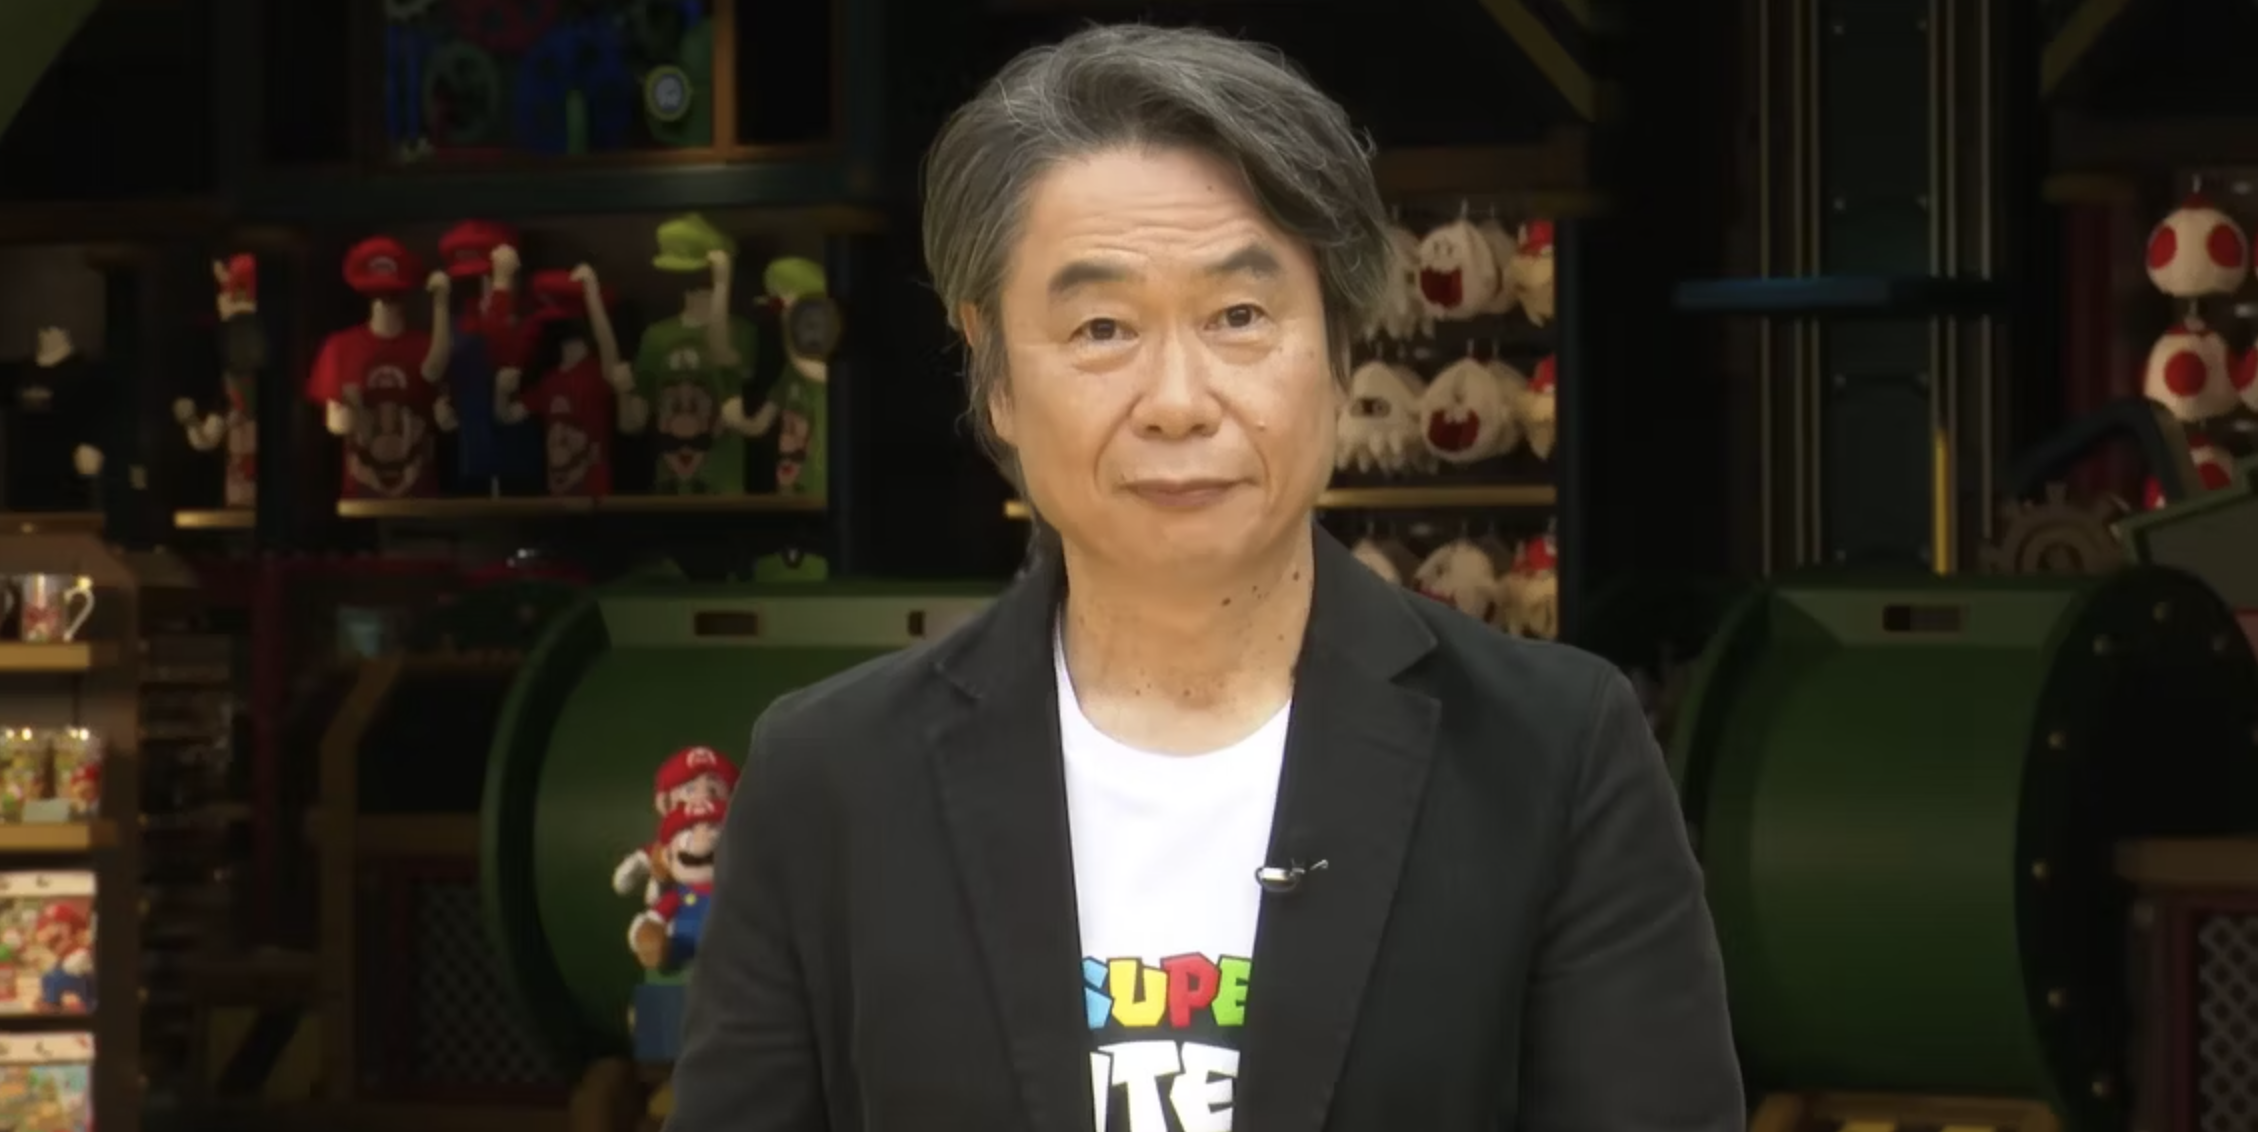 Renowned video game designer Shigeru Miyamoto shares that he currently has no intentions of retiring from his role at Nintendo.